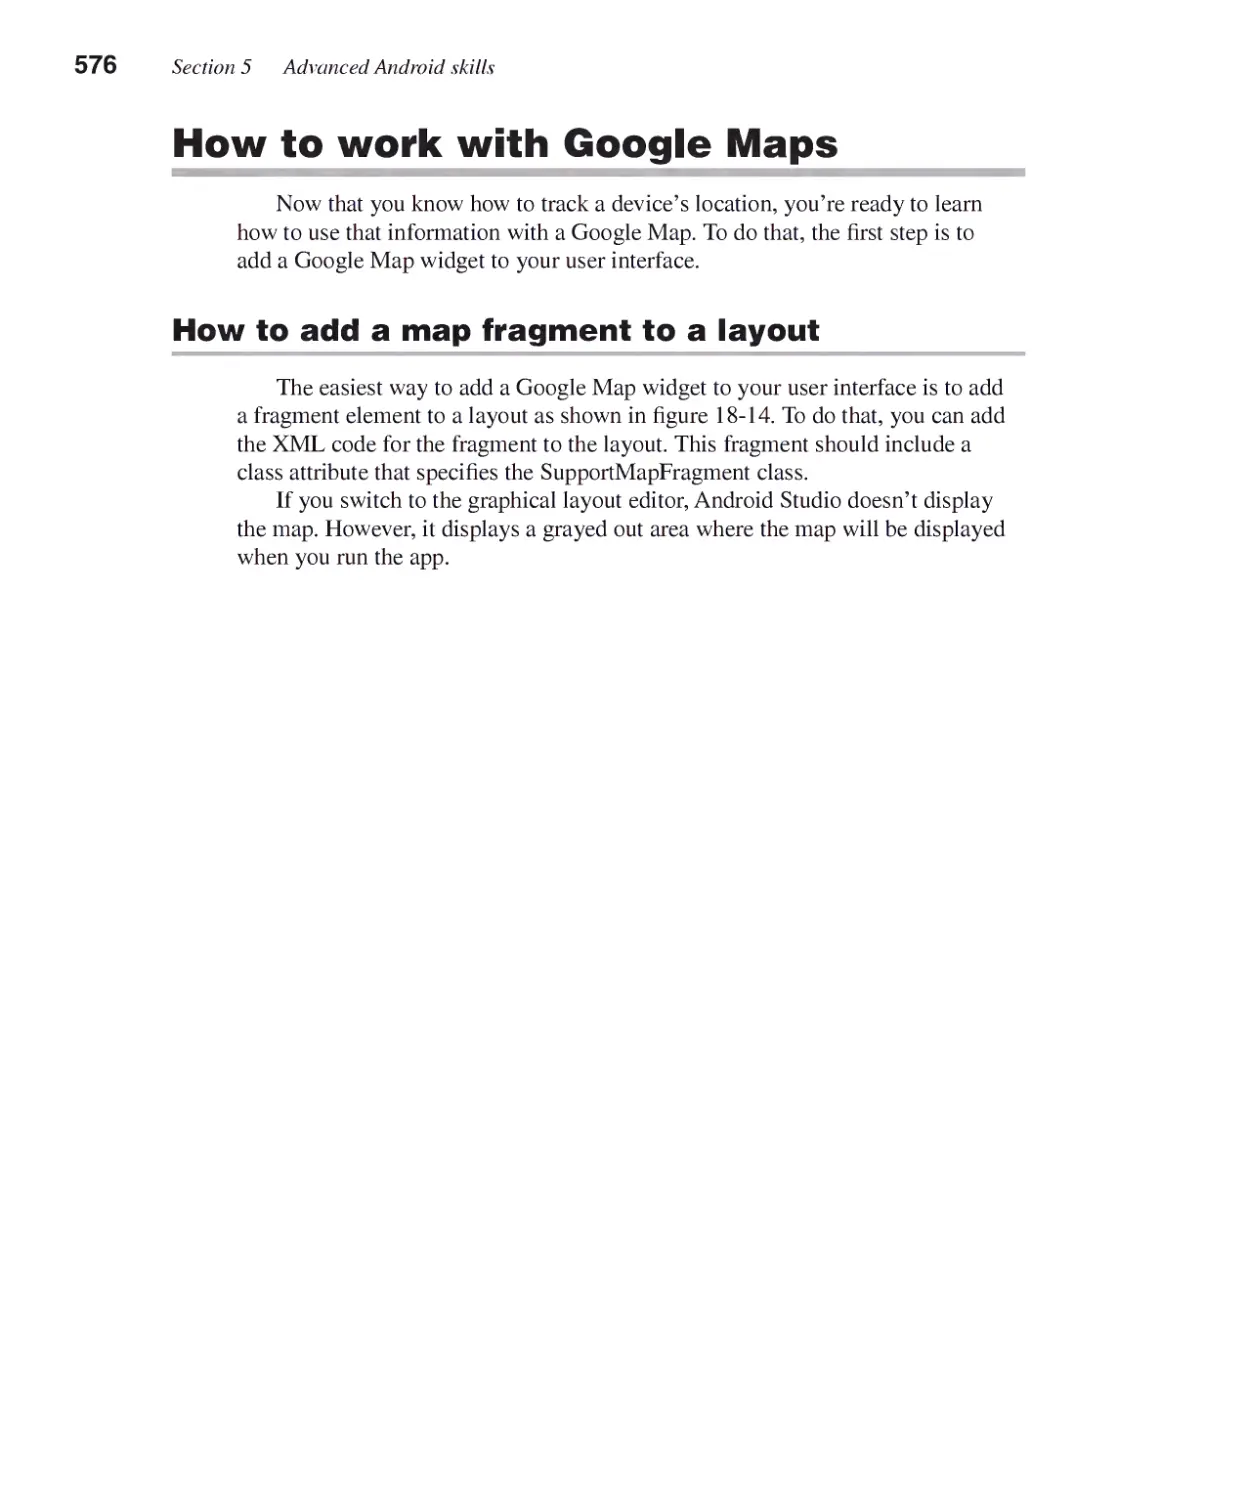 How to Work with Google Maps